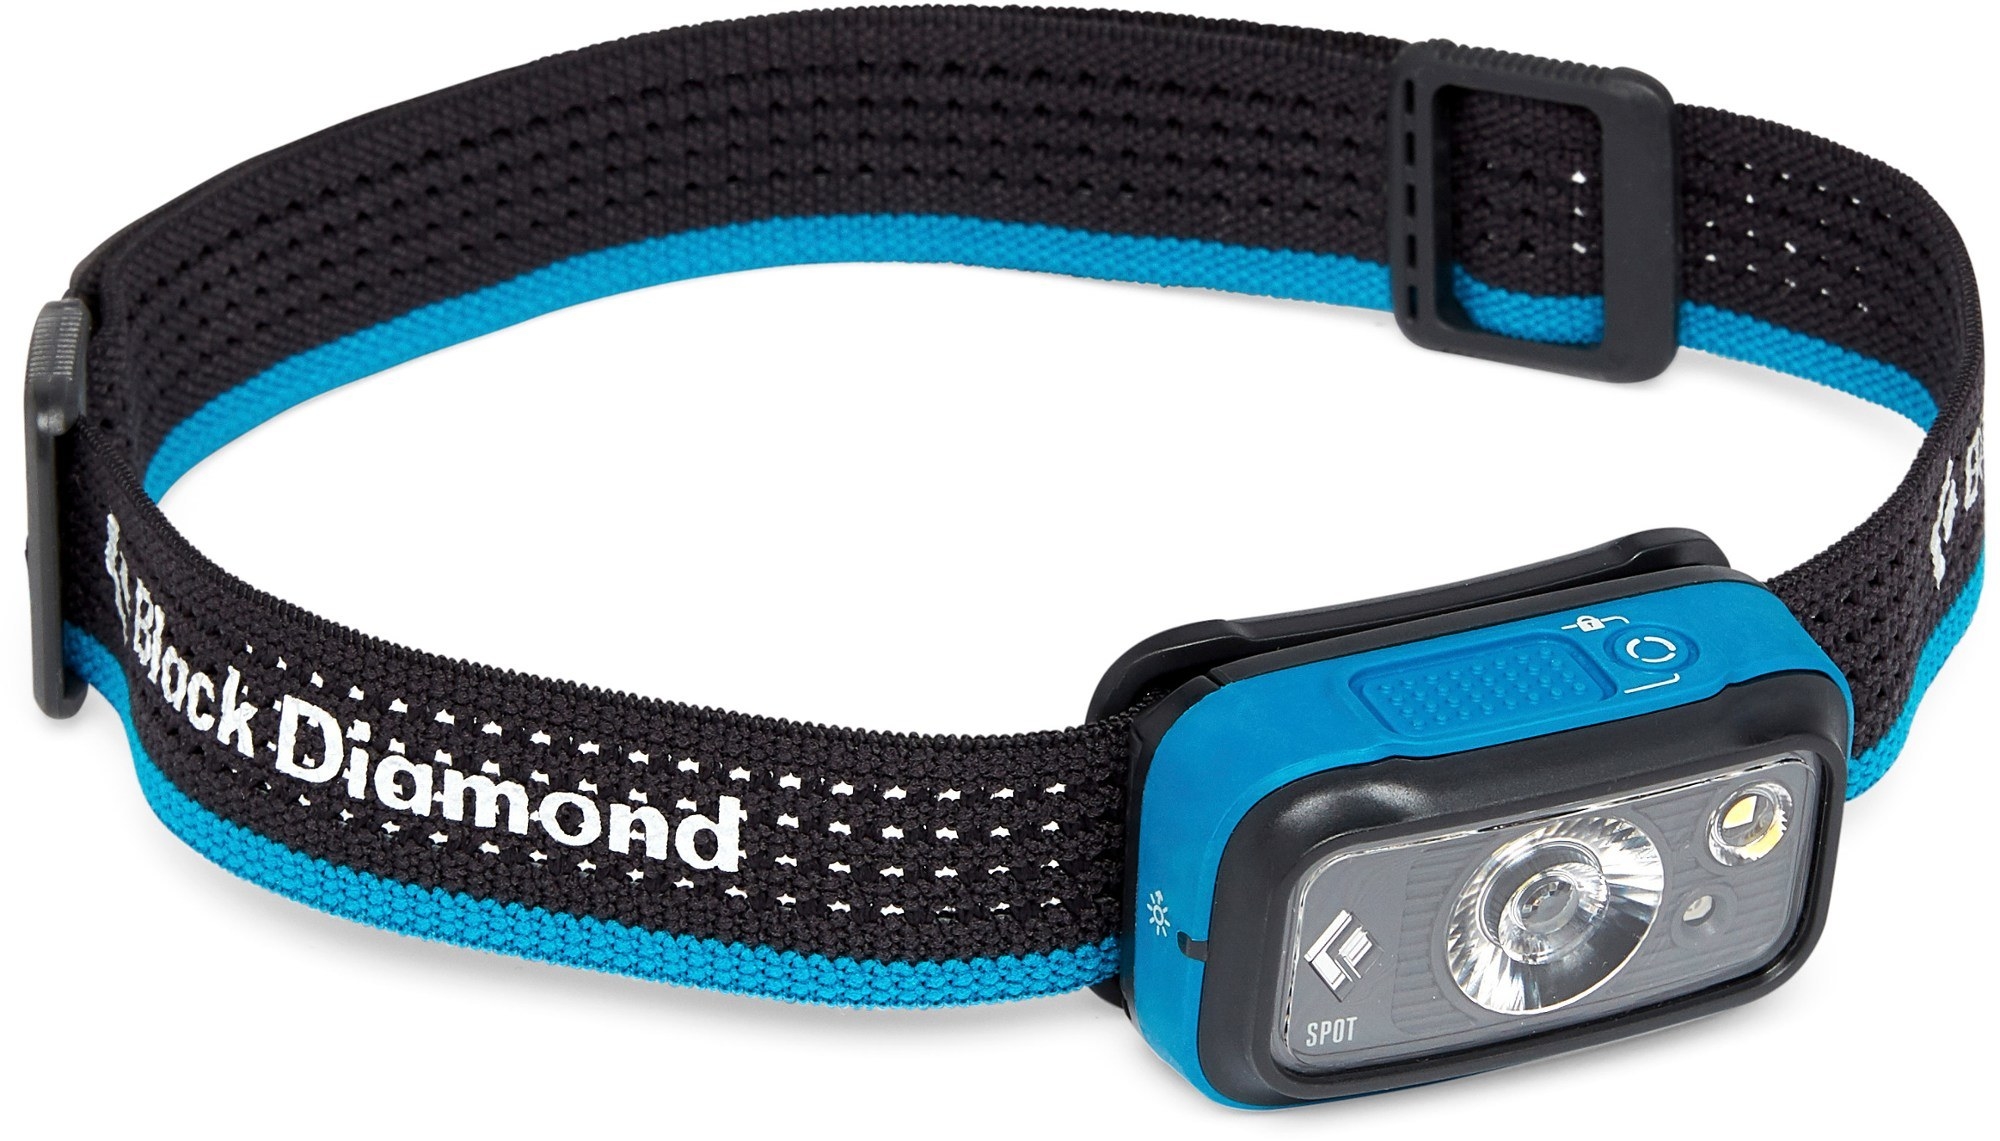 blue and black headlamp with adjustable band